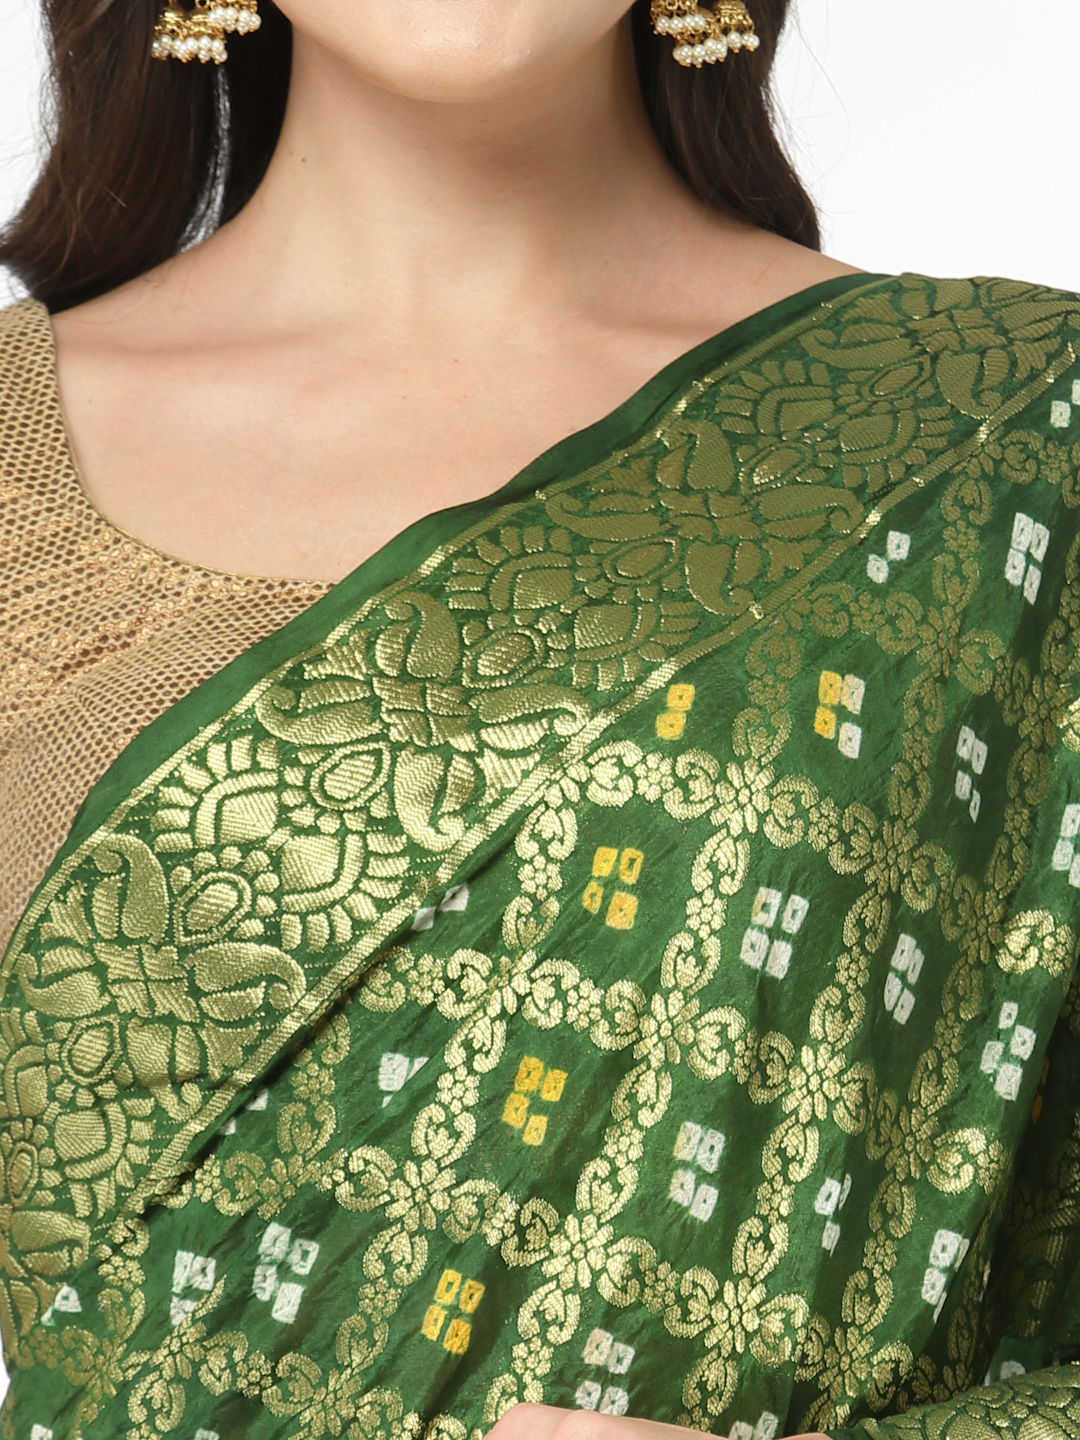 Women Silk Bandhani and Zari Weaving Saree with Unstitched Blouse - Green